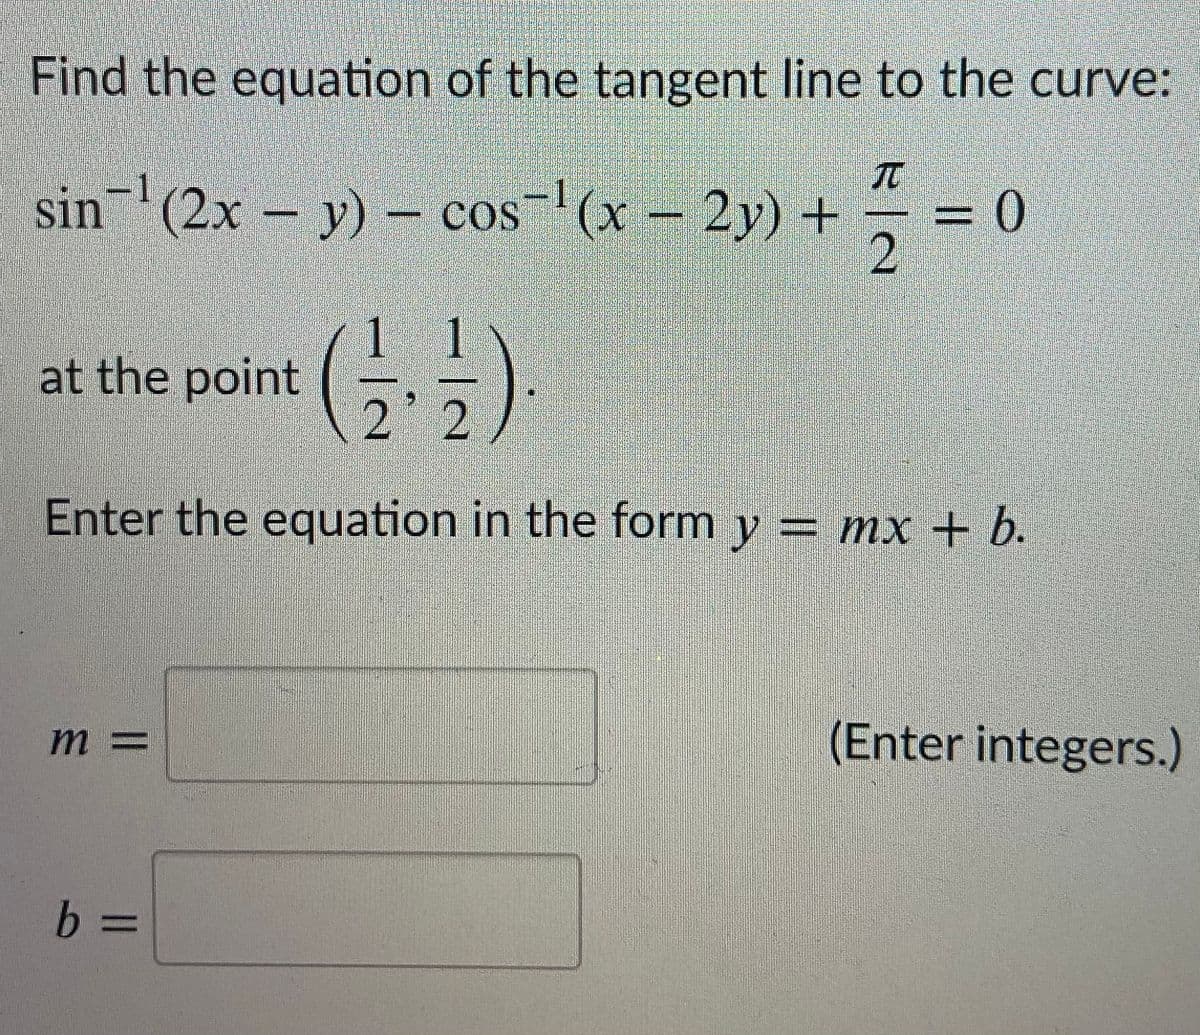 Find the equation of the tangent line to the curve:
sin (2x – y) – cos-'(x – 2y) +
y)- cos
((x-2y) +
=D0
1 1
at the point
2 2
Enter the equation in the form y = mx + b.
m 3=
(Enter integers.)
b.
b 3=
